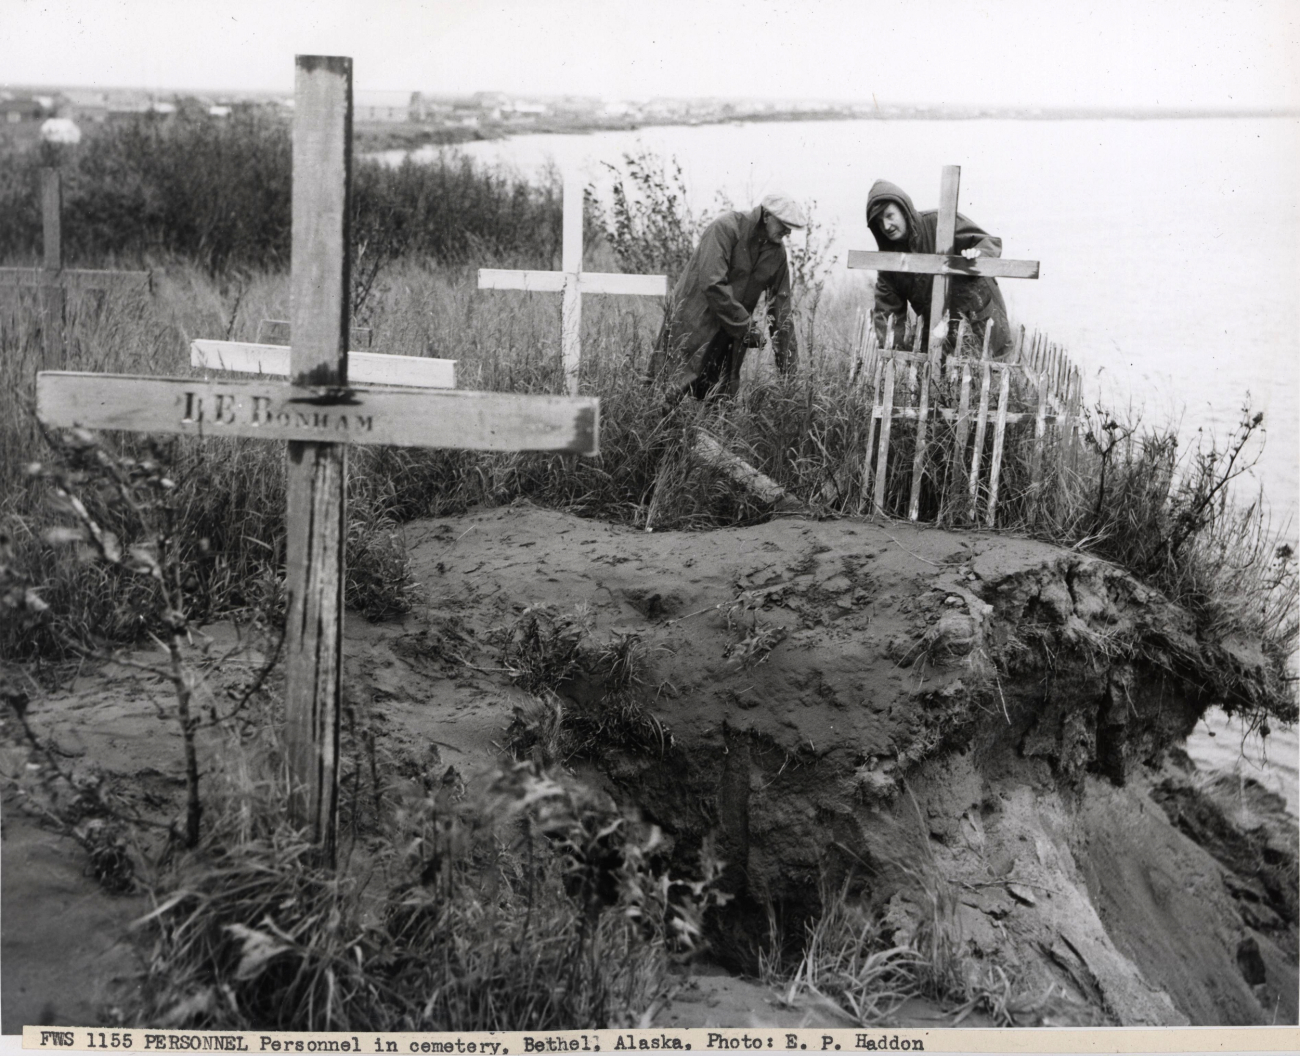 Portions of the Bethel cemetery eroding into the Kuskokwim River